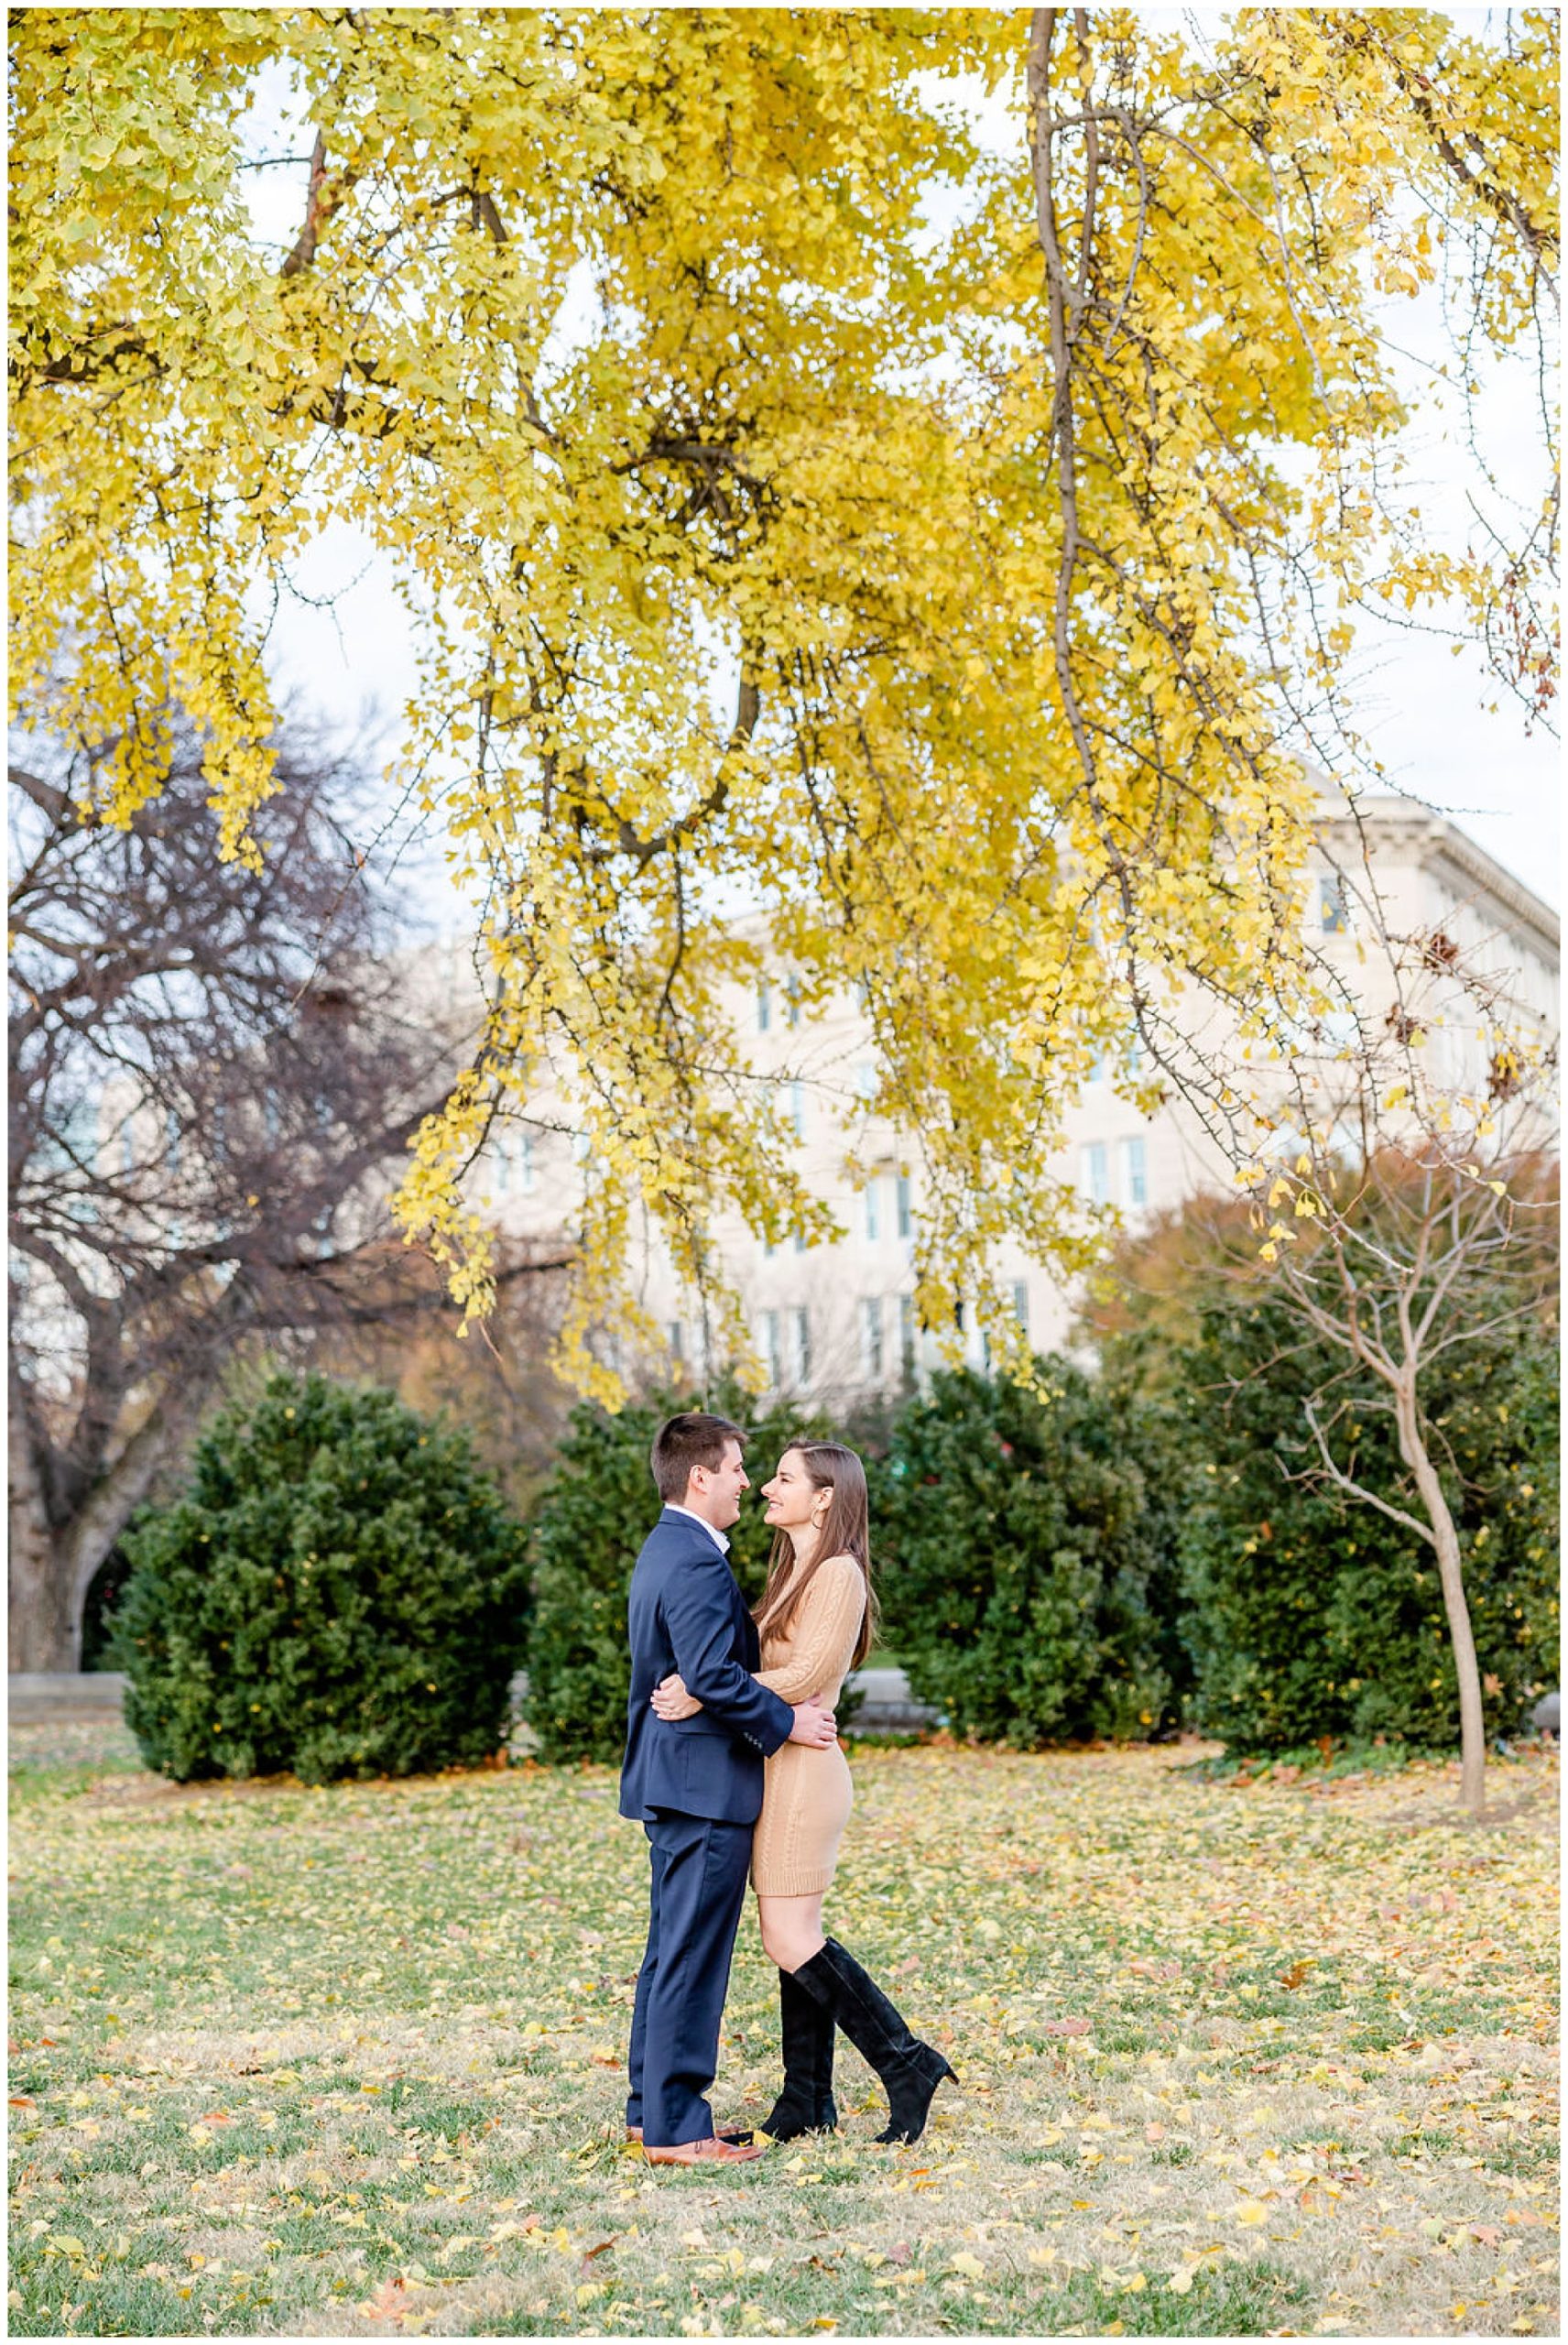 autumn Capitol Hill engagement session, Capitol Hill engagement photos, Capitol Hill photographer, DC engagement photography, DC engagement photographer, DC wedding photography, autumn engagement photos, casual engagement photos, Rachel E.H. Photography, couple hugging, couple hugging under tree, tree with small yellow leaves